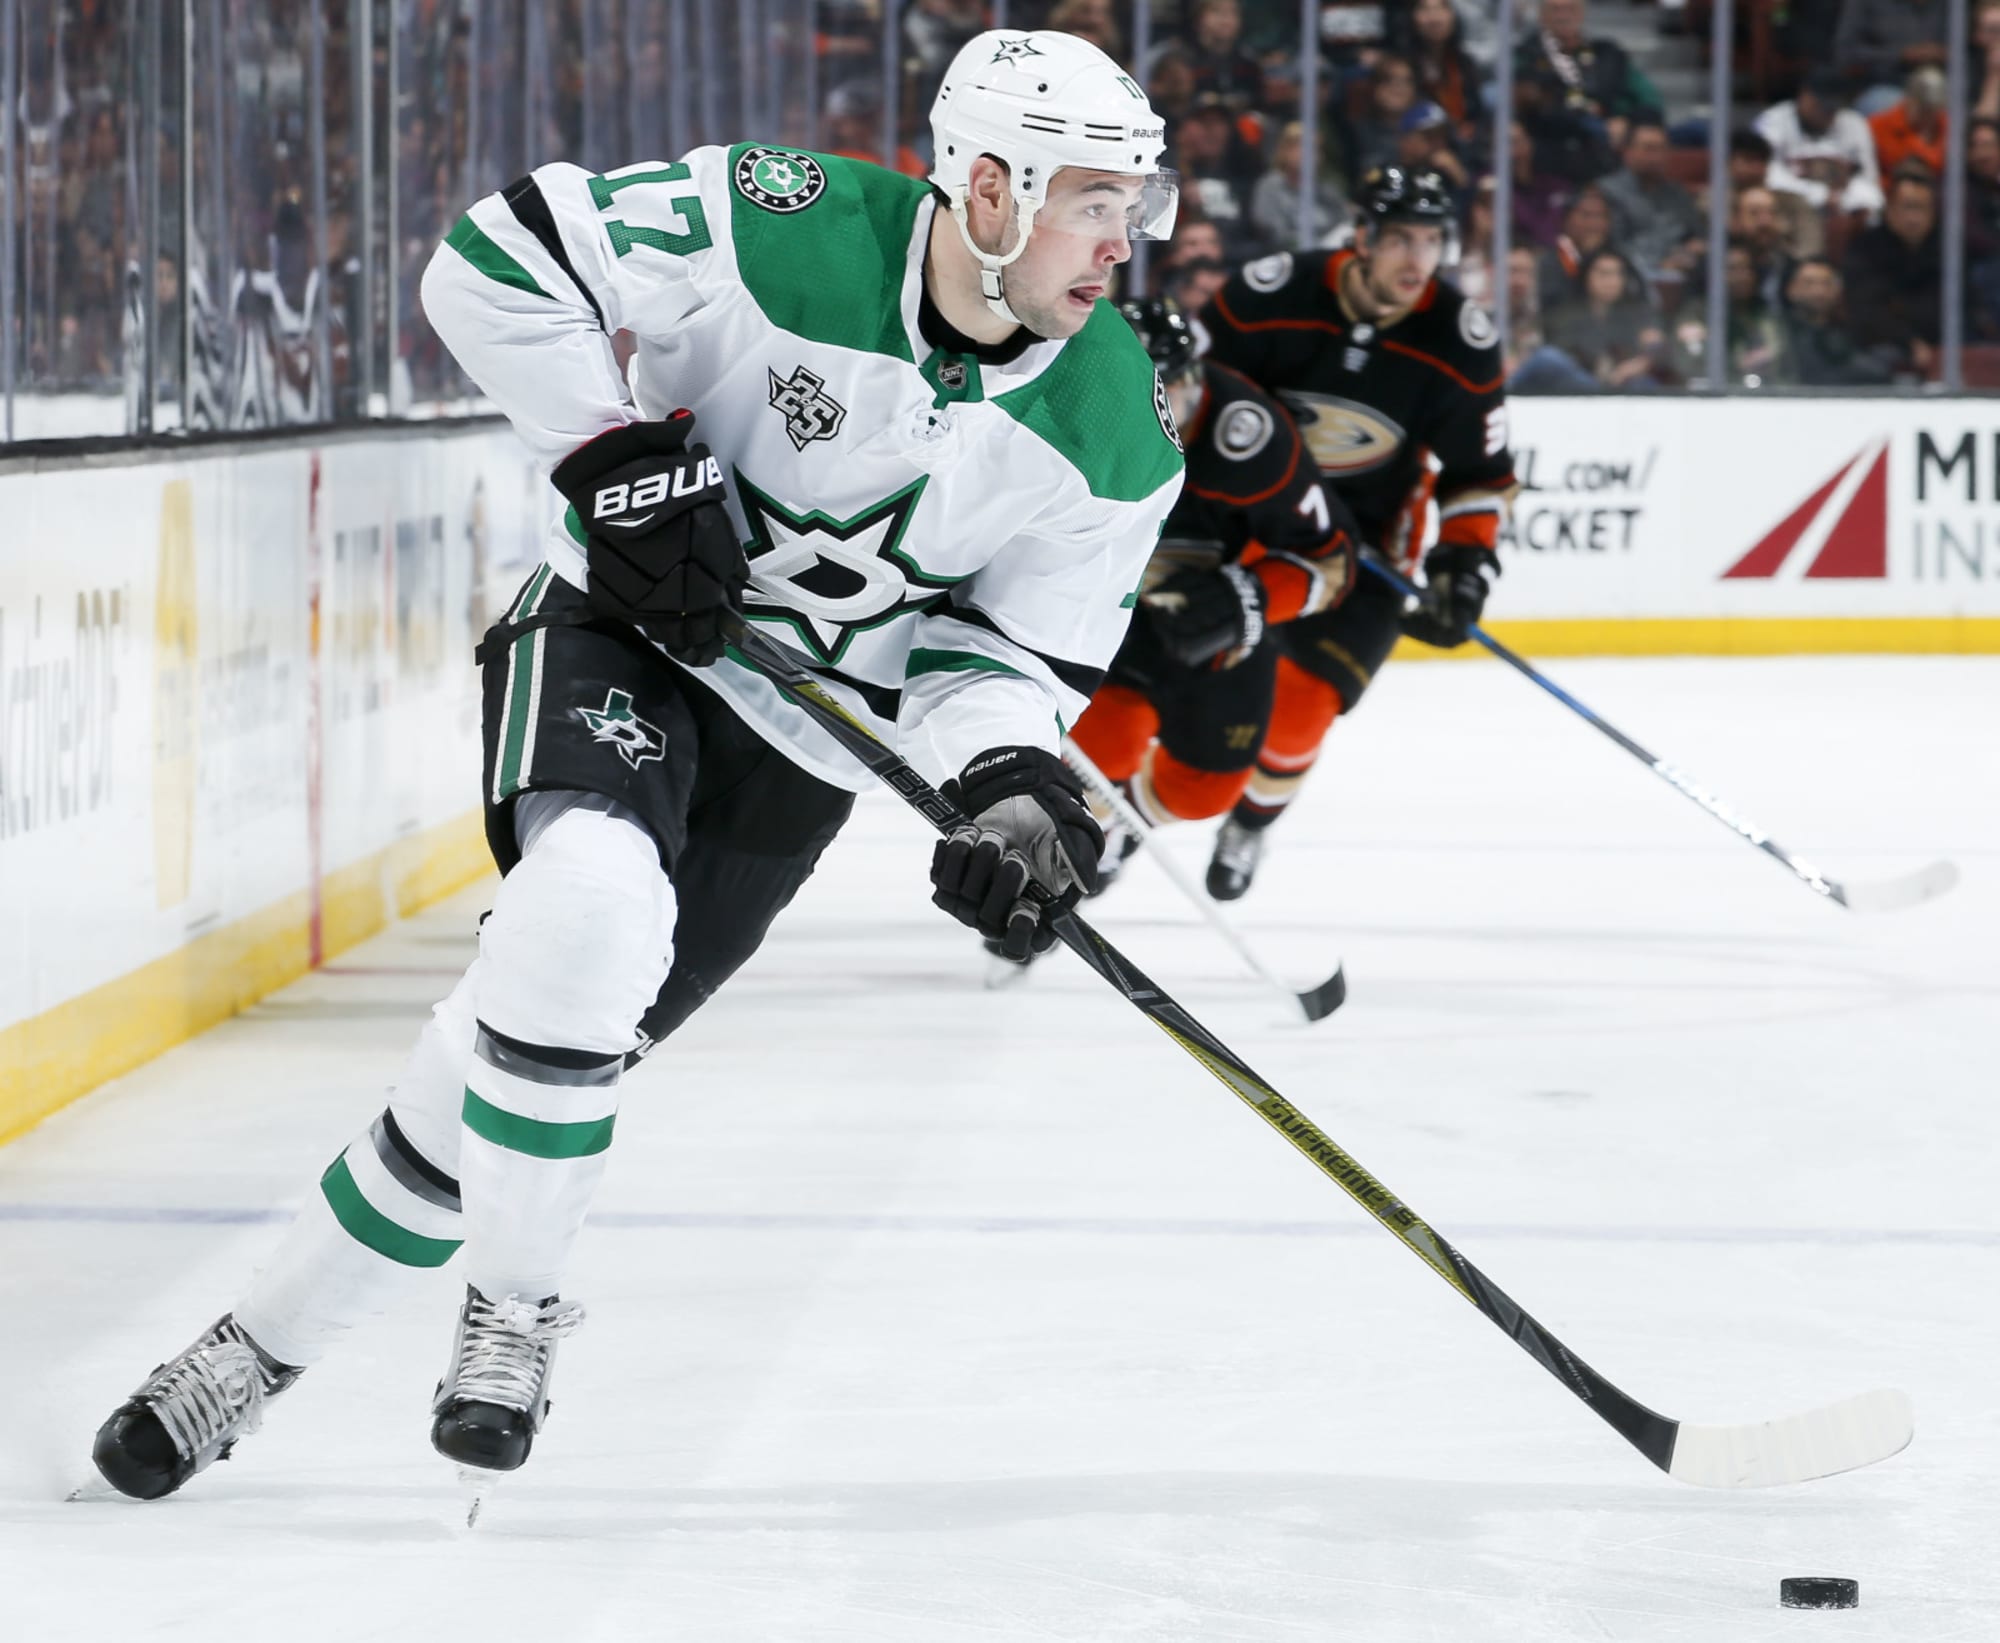 The Dallas Stars have re-signed center Devin Shore to a two-year deal worth